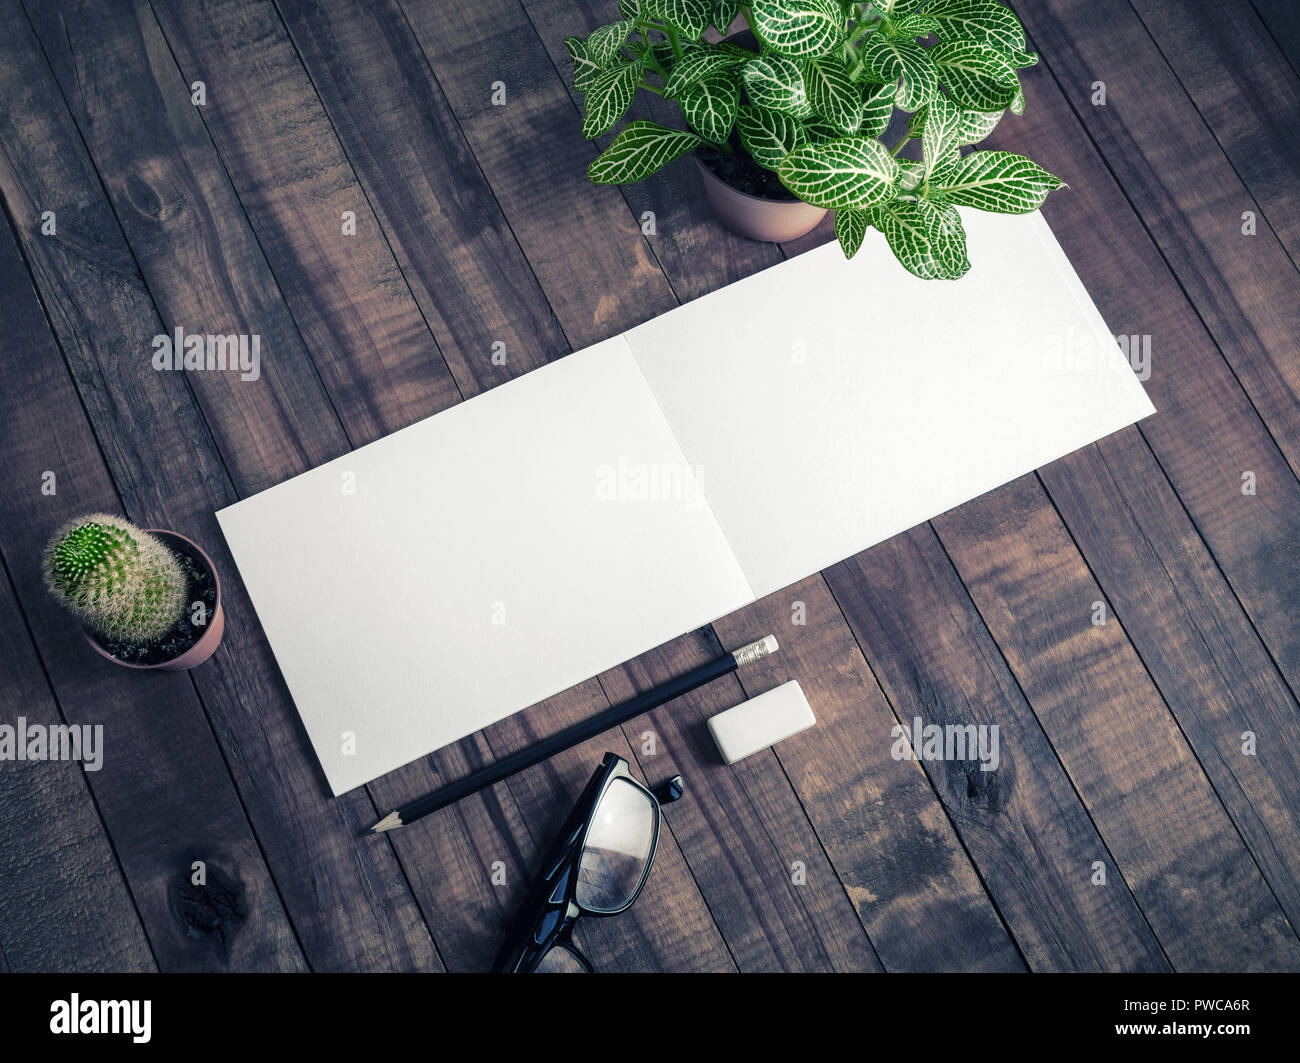 Stationery and plants on vintage wood table background. Responsive design mockup. Stock Photo